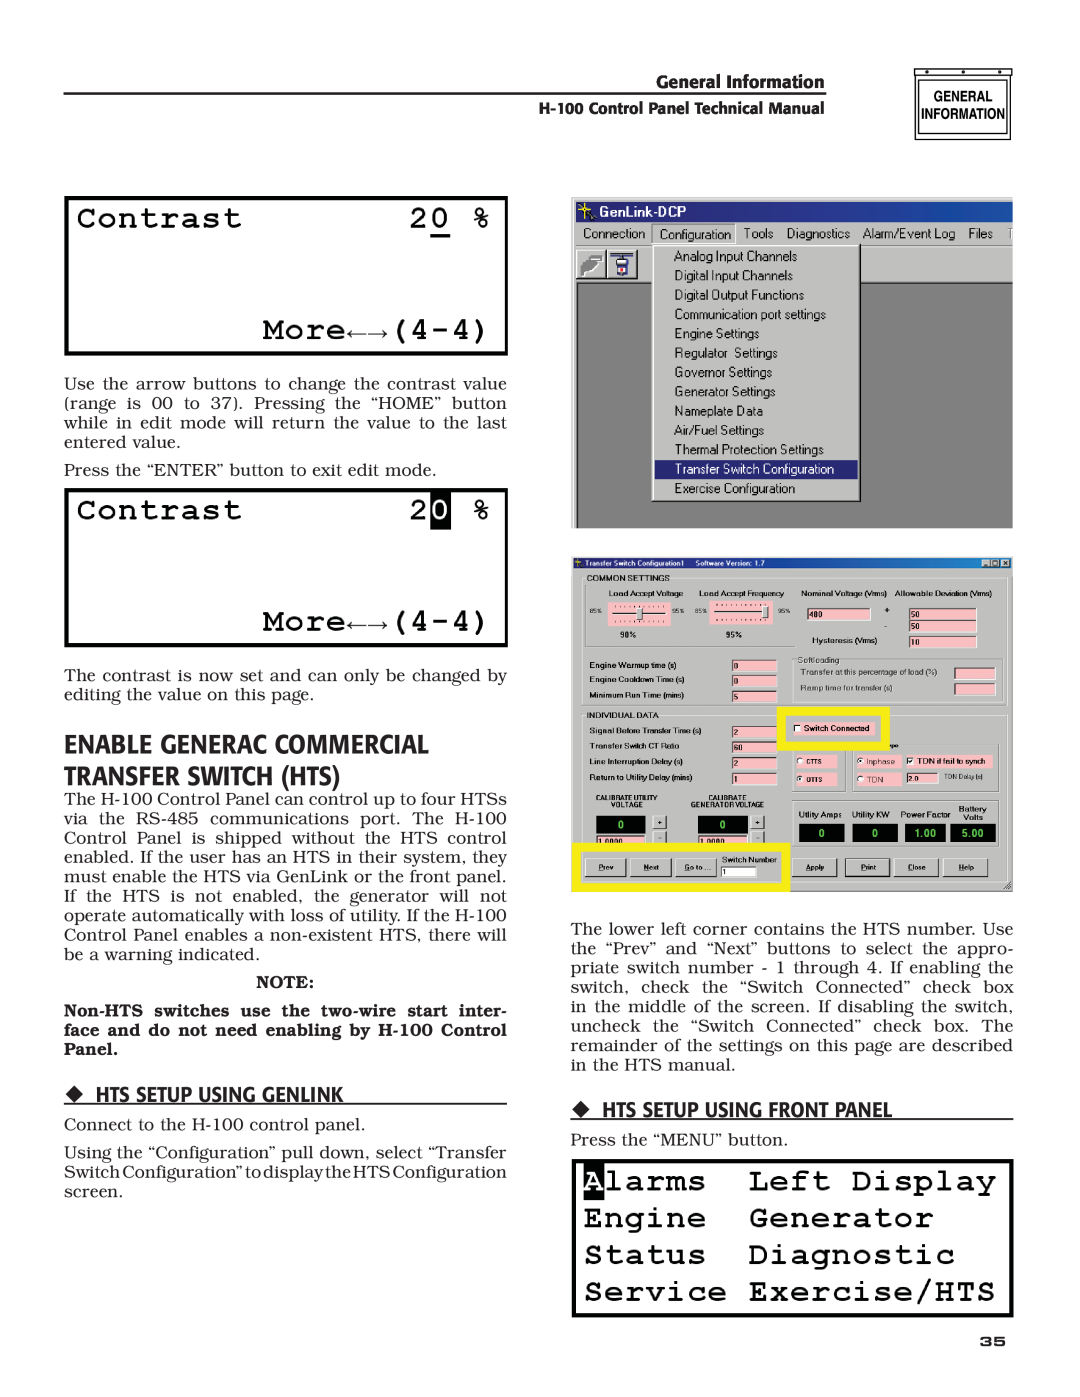 Generac Power Systems H-100 technical manual ‹Hts Setup Using Genlink, ‹Hts Setup Using Front Panel, General Information 